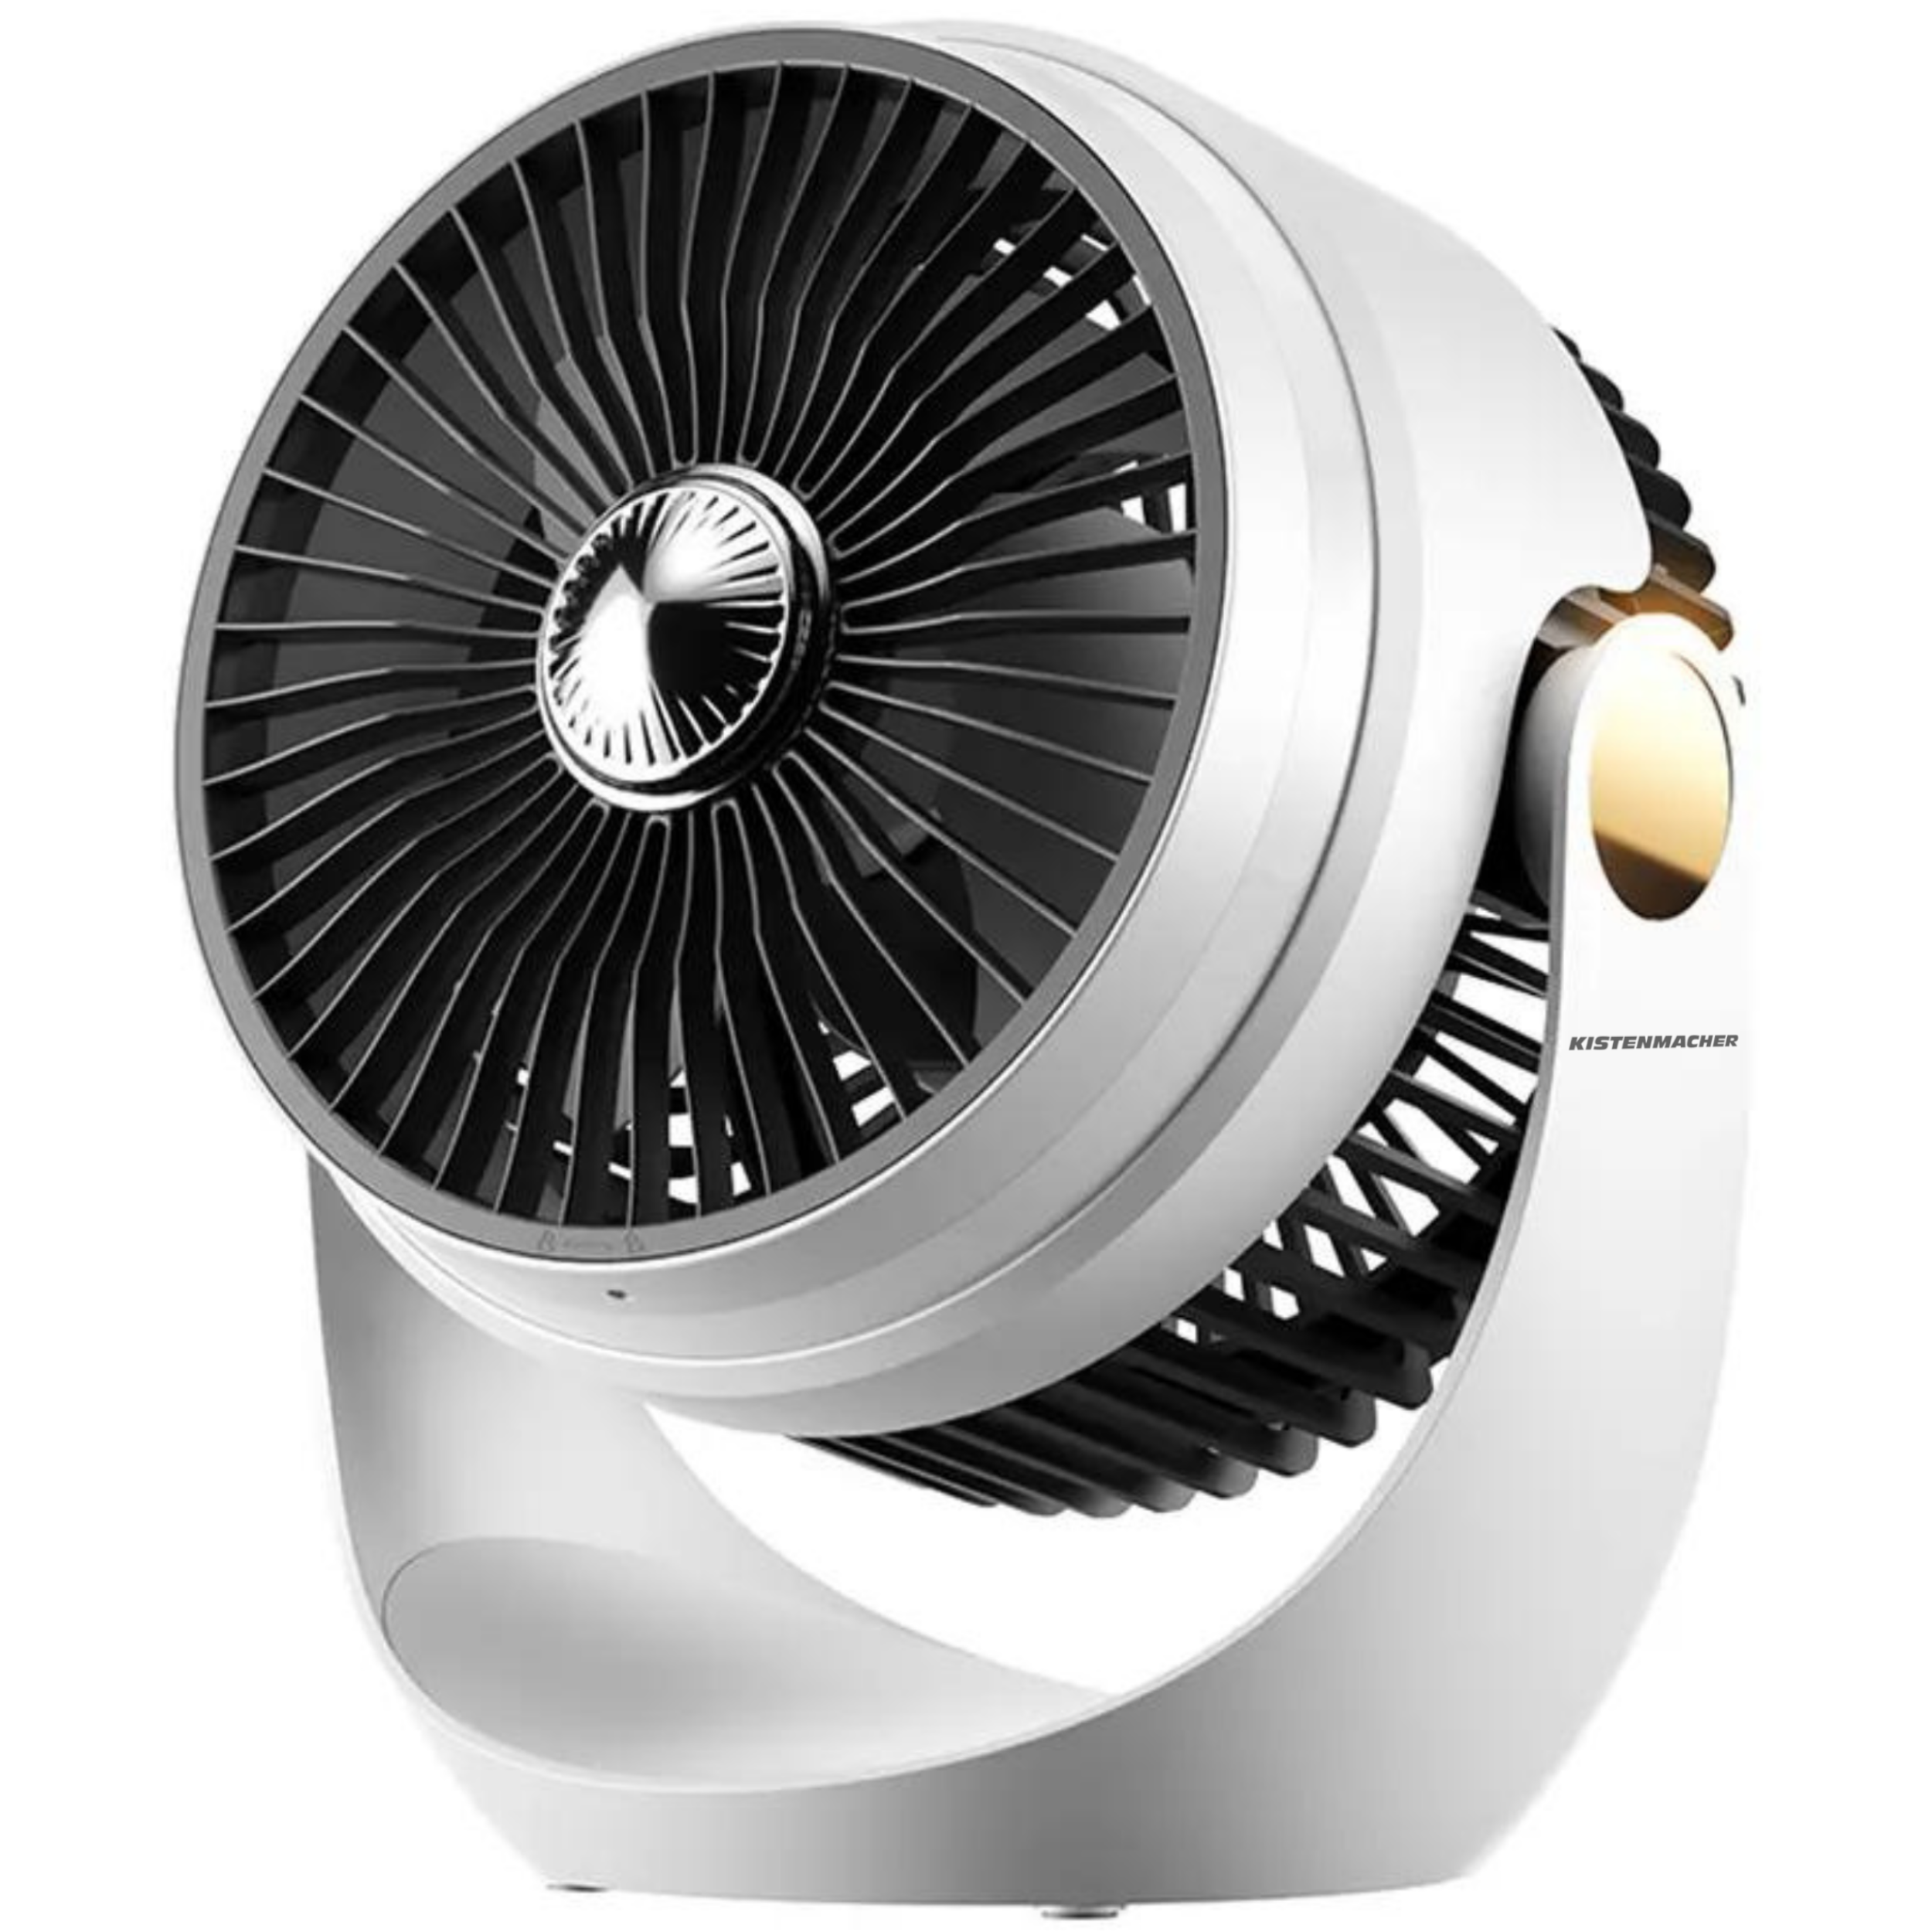 Camping Fan with night-light and integrated aroma-box (for aromatherapy or anti-Mosquito)